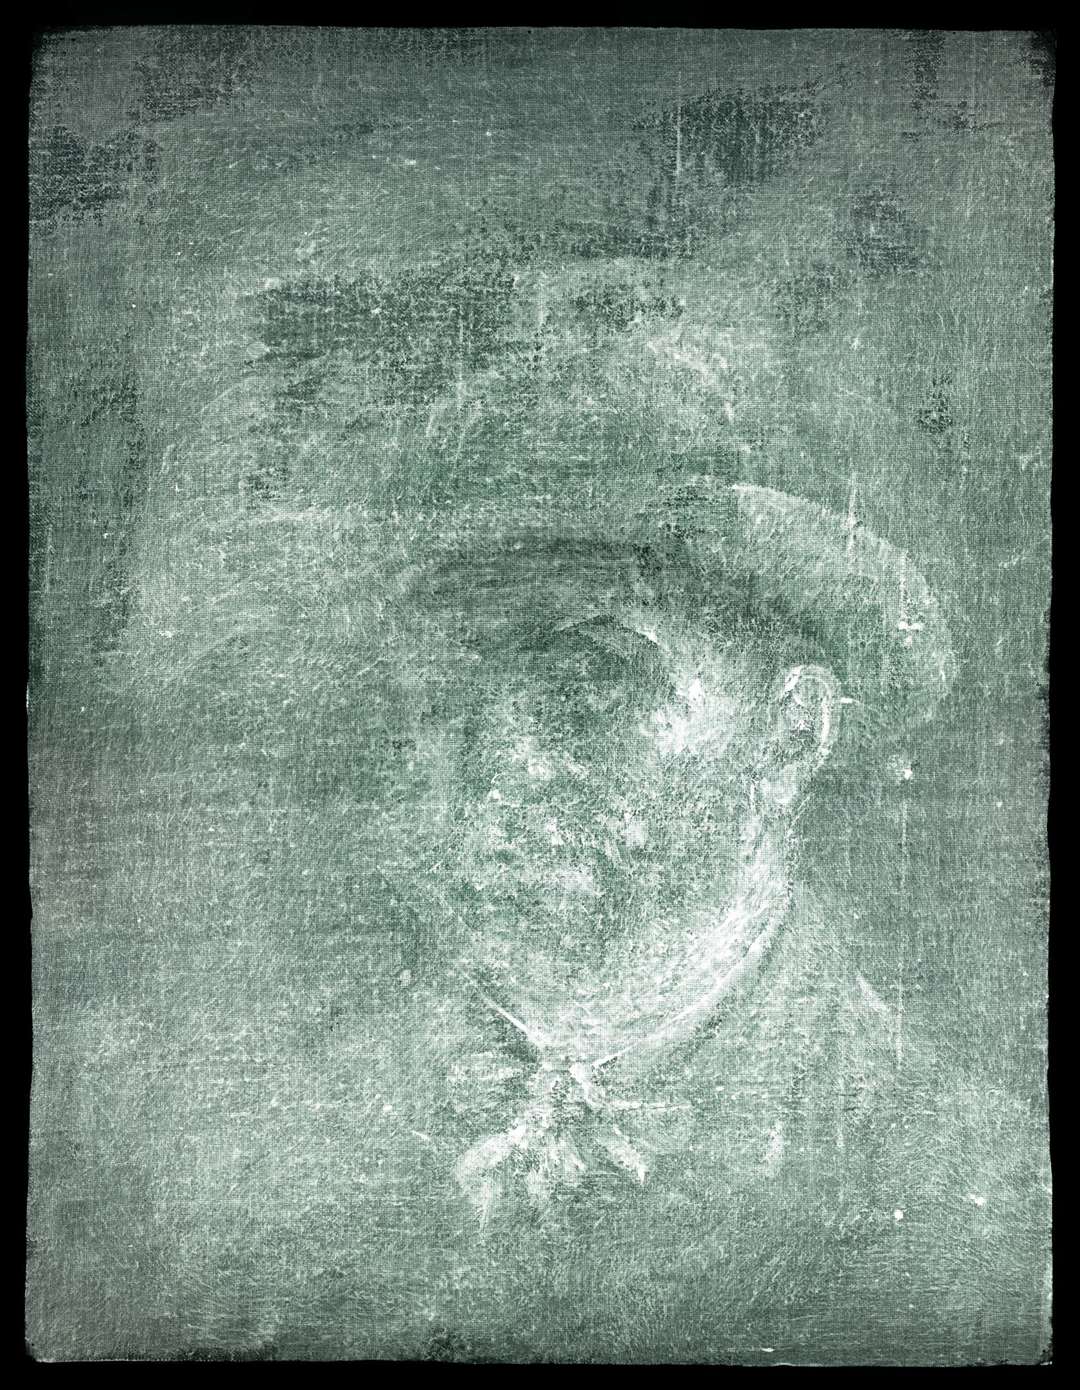 X-ray image believed to show a self-portrait of Vincent Van Gogh (National Galleries of Scotland)